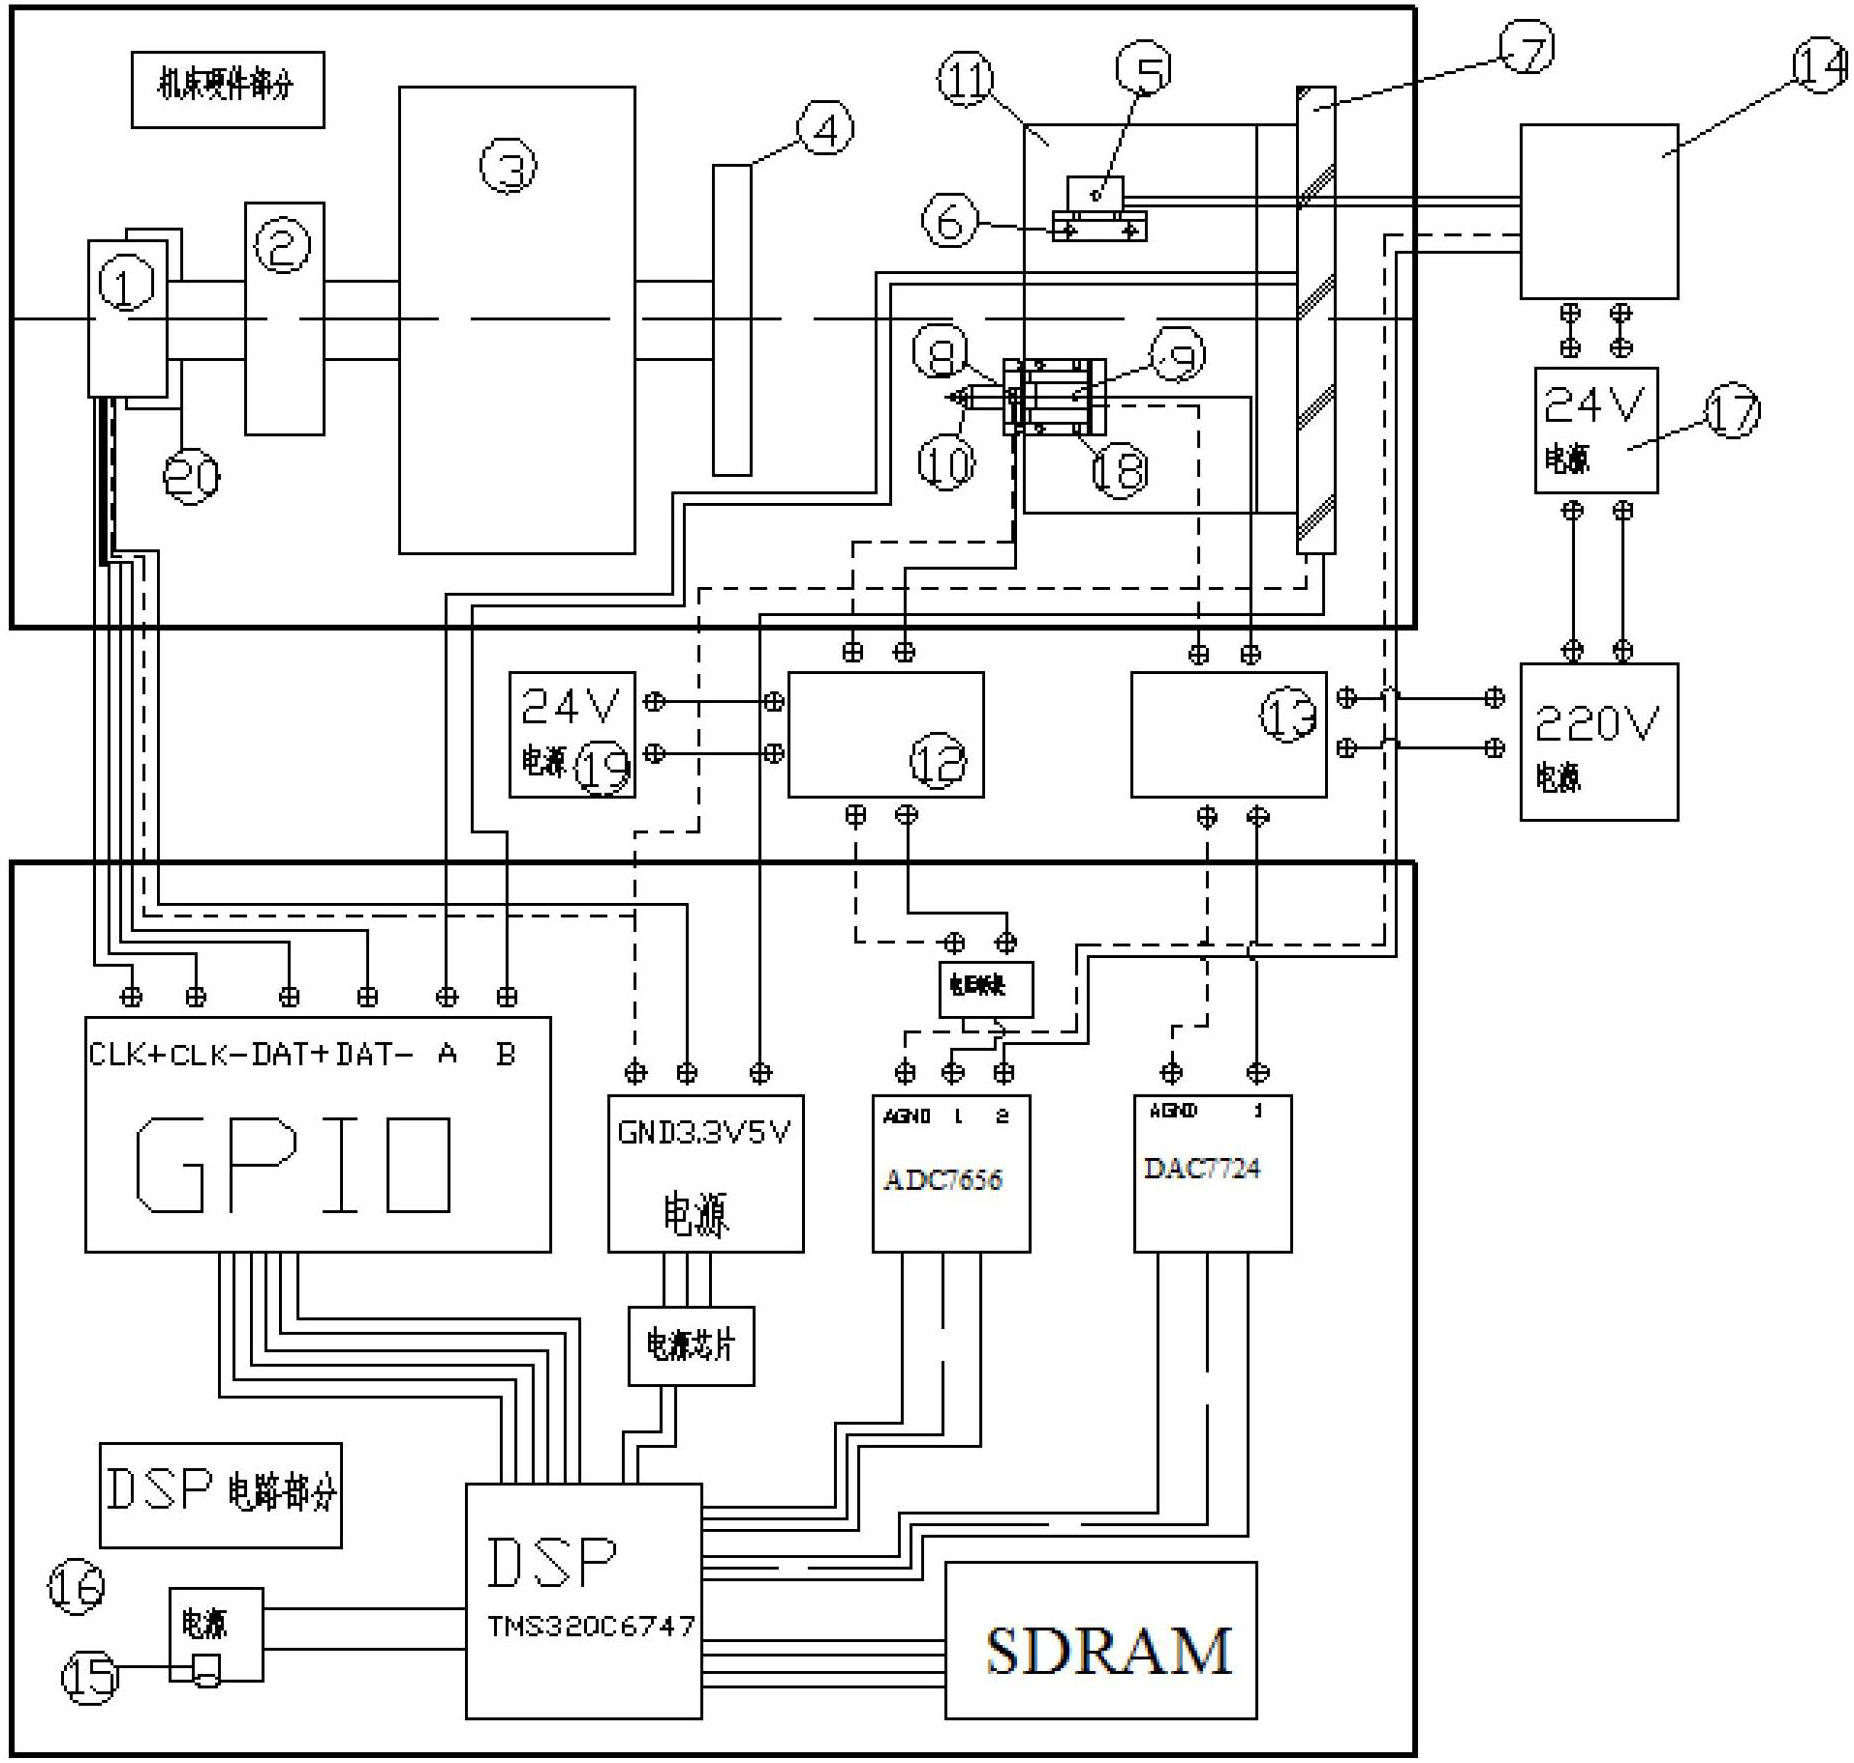 System for measuring surface topography of aerospace thin-wall disc part and machining fixture based on digital signal processor (DSP)